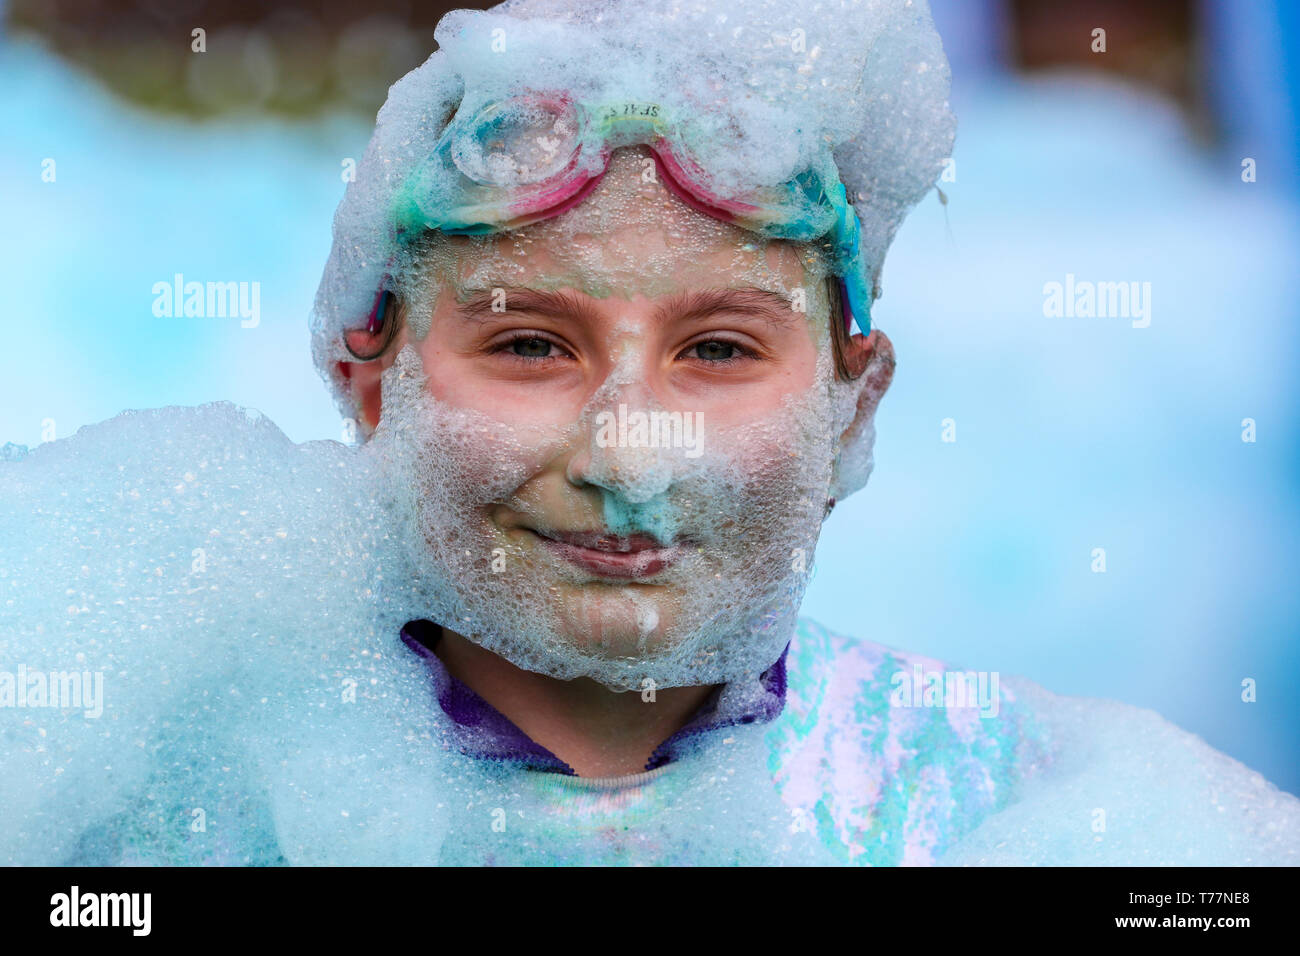 Glasgow, Scotland, UK. 5th May 2019. About 3,500 runners of all ages took part in the Bubble Rush Charity Run through Bellahouston Park, Glasgow to raise funds for the "Prince and Princess of Wales Hospice". The runners had to race over 5 kilometres and through pits of blue, yellow, red and green coloured foam before they successfully crossed the finish line. Credit: Findlay/Alamy Live News Stock Photo